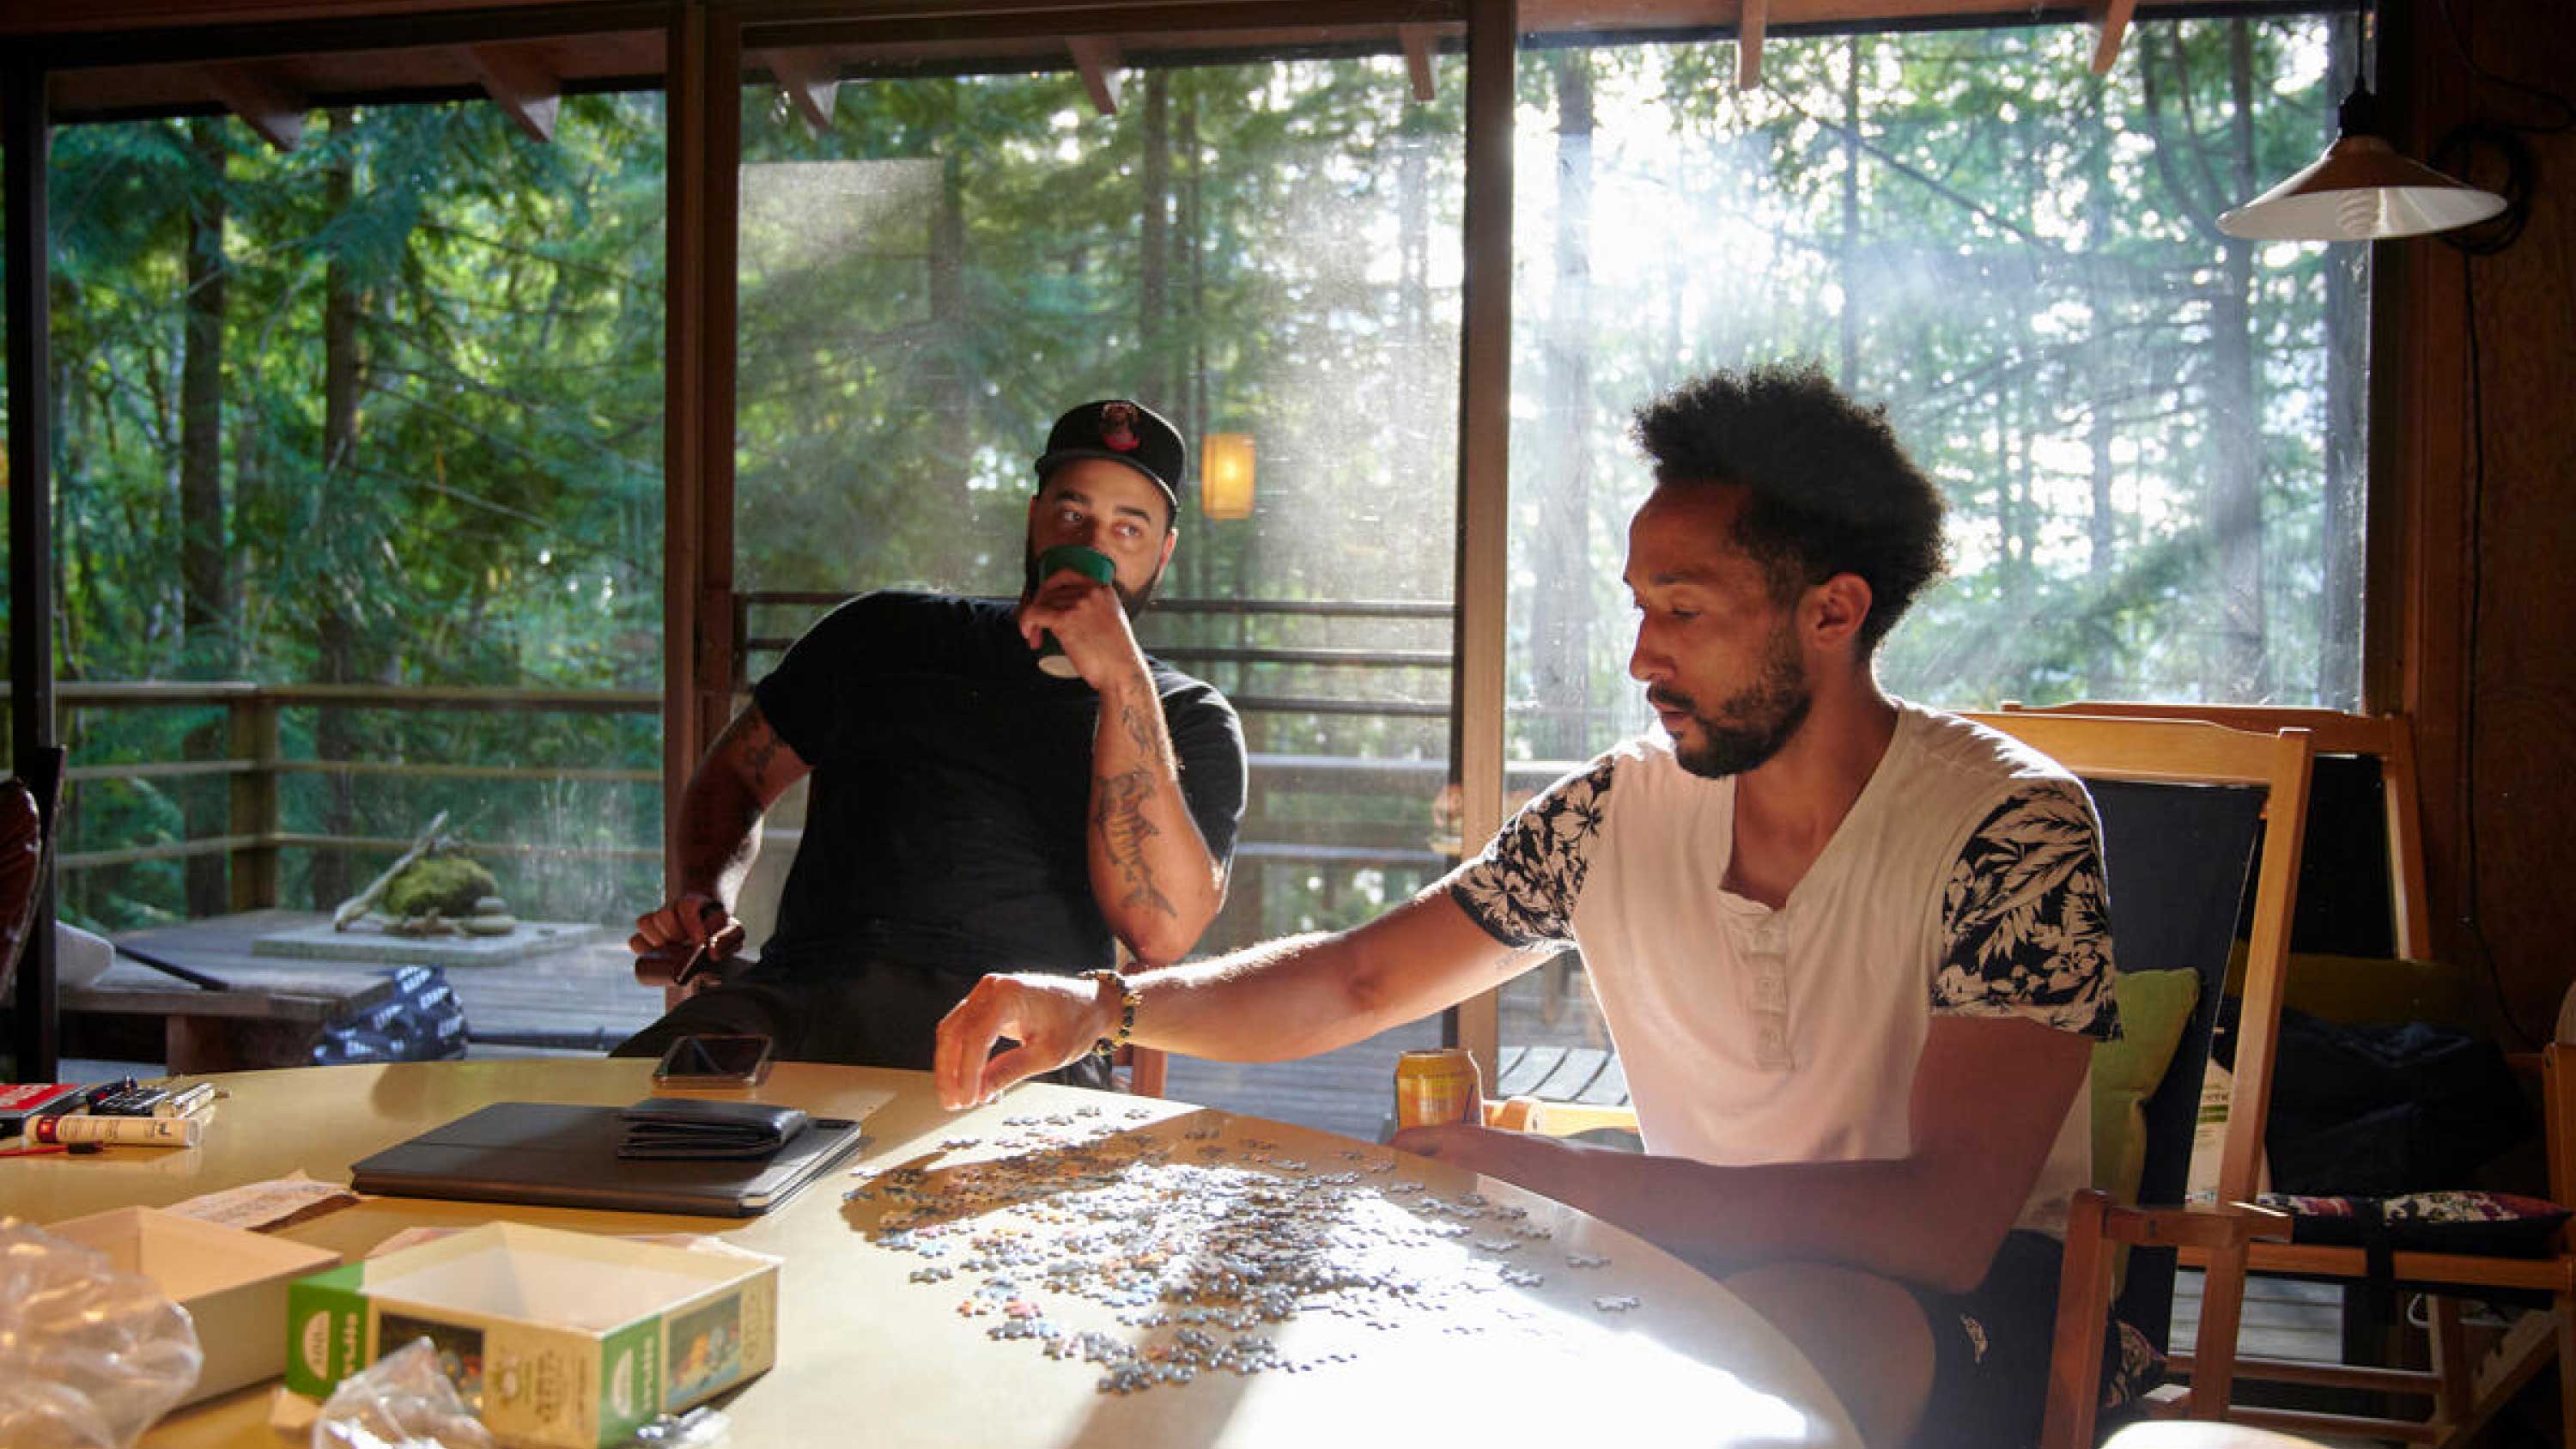 Two men sit at a table, working on a puzzle, as the sun sets through the window.